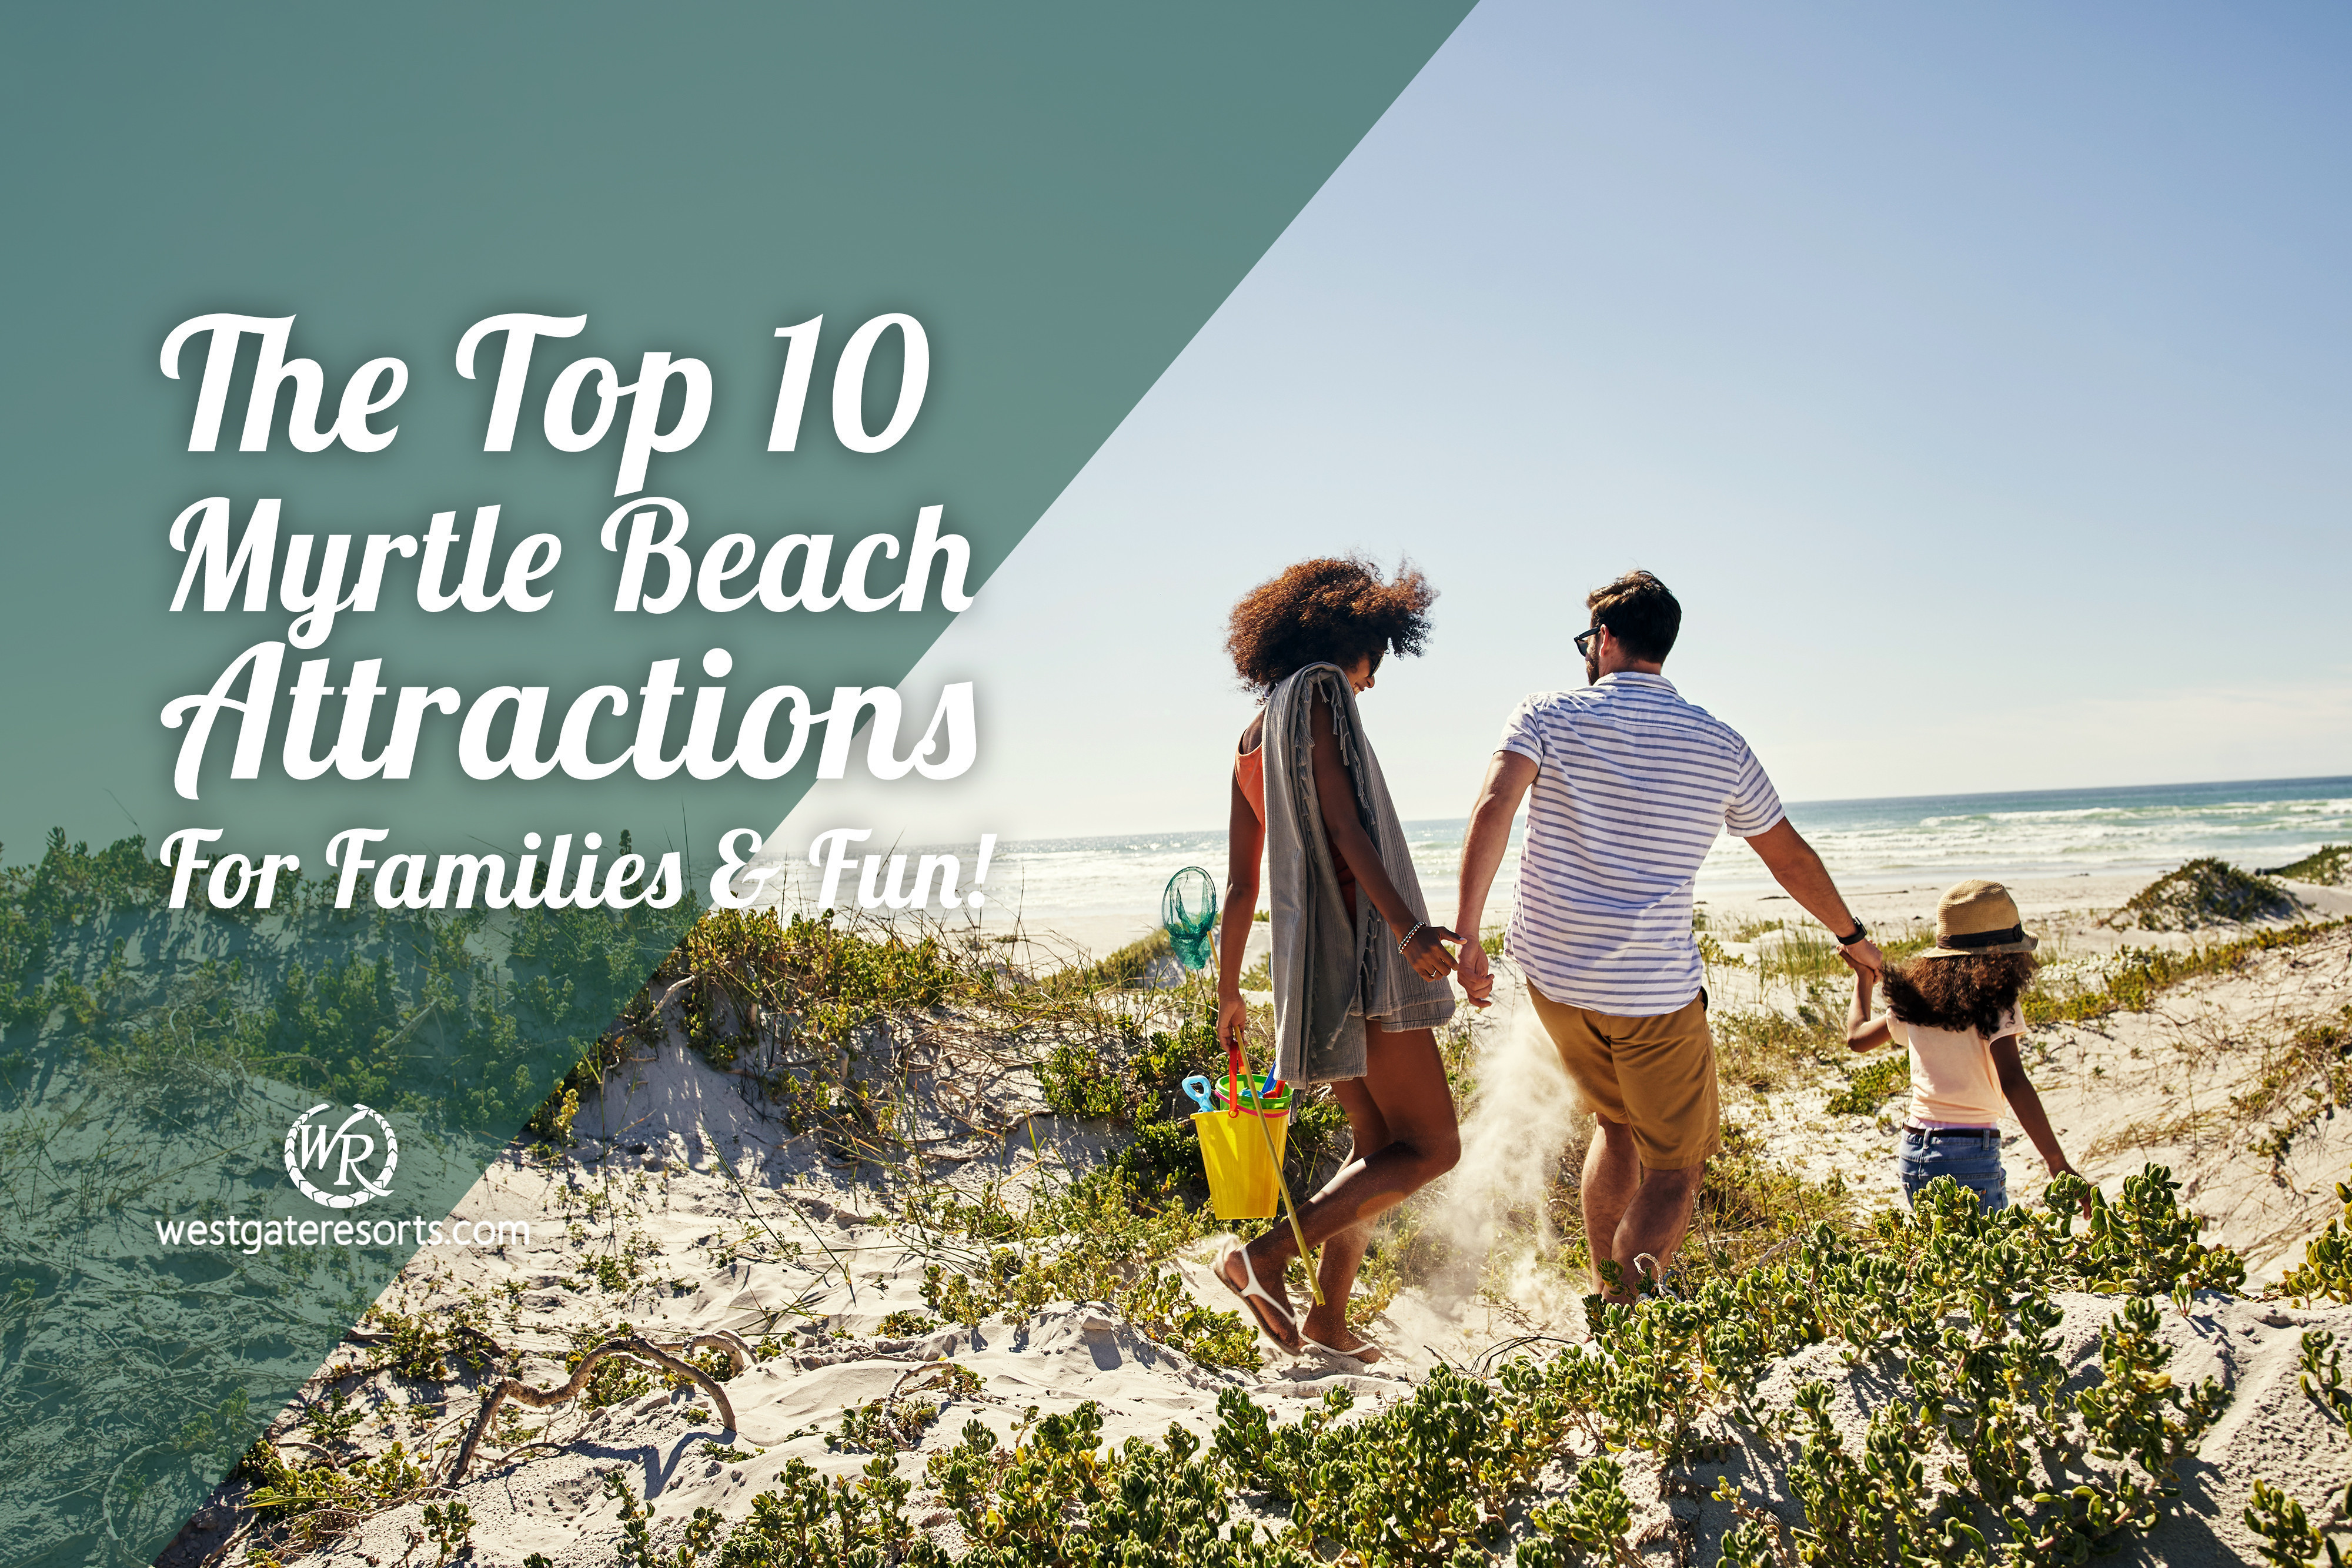 The Top 10 Myrtle Beach Attractions For Families And Fun!